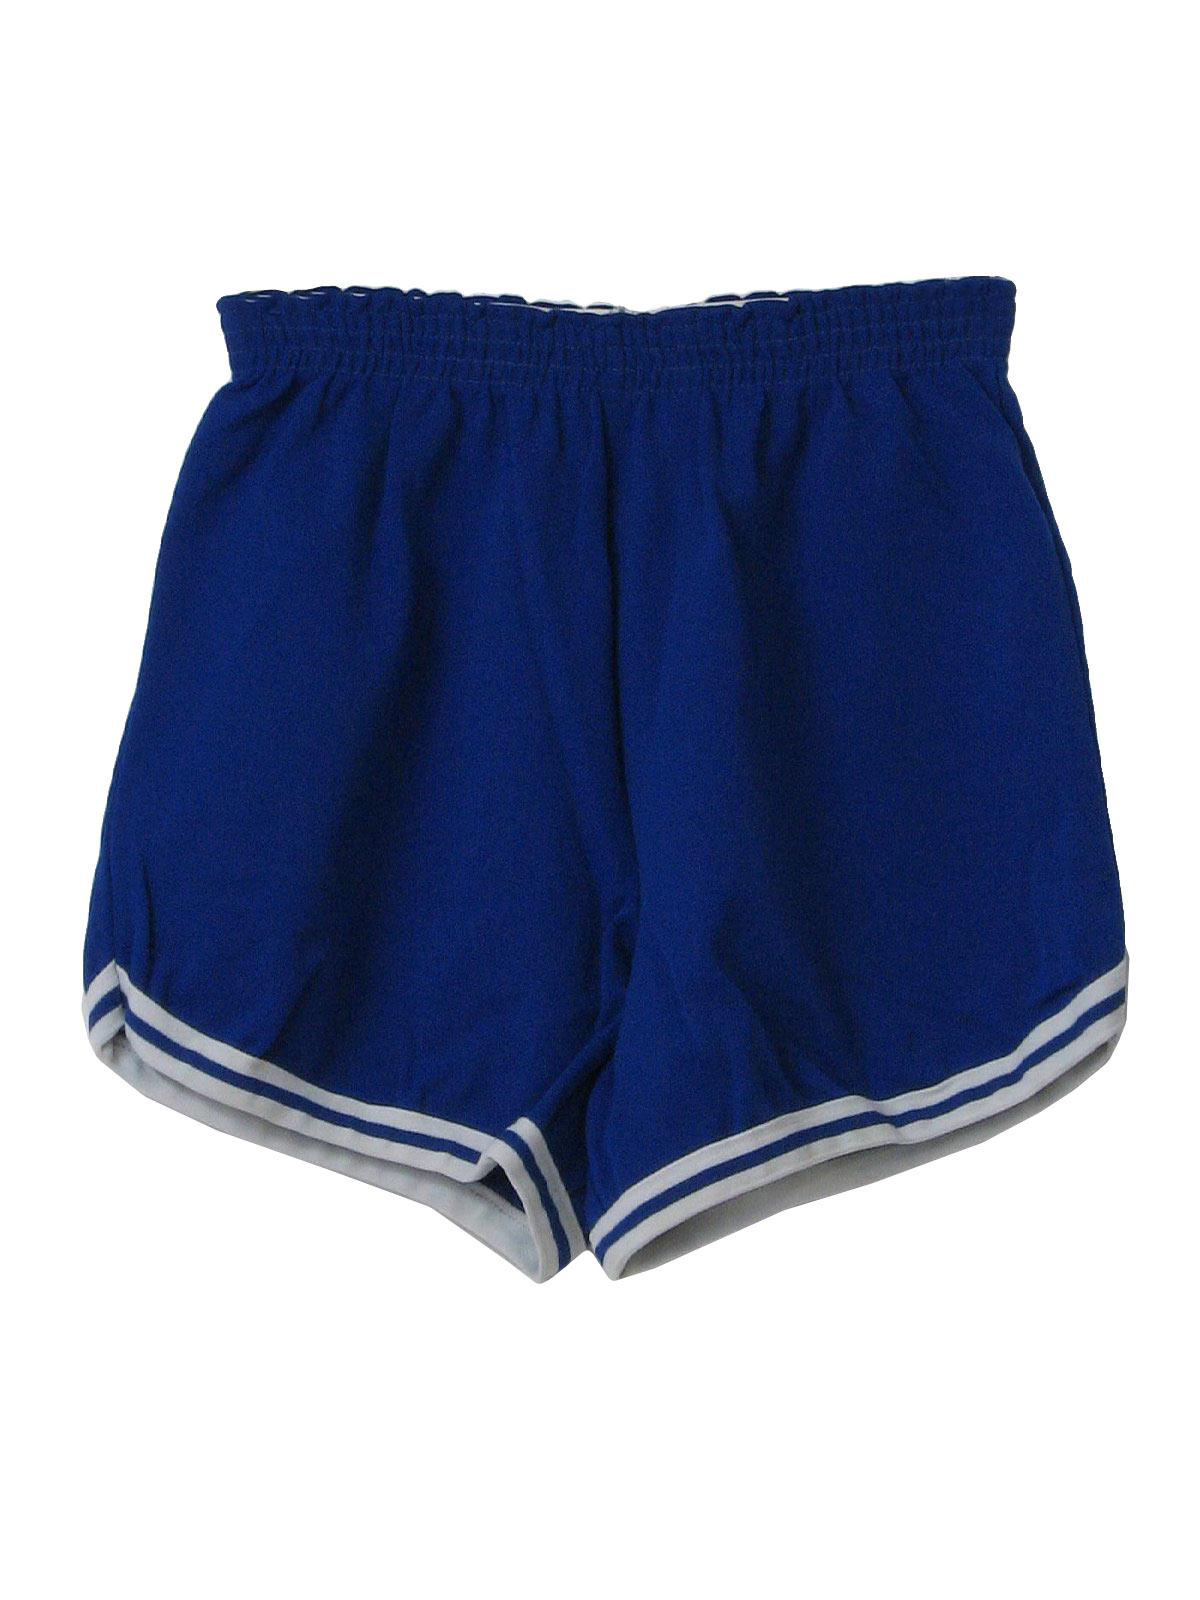 Retro Eighties Shorts: 80s -Don Athletic- Mens dark blue polyester high ...